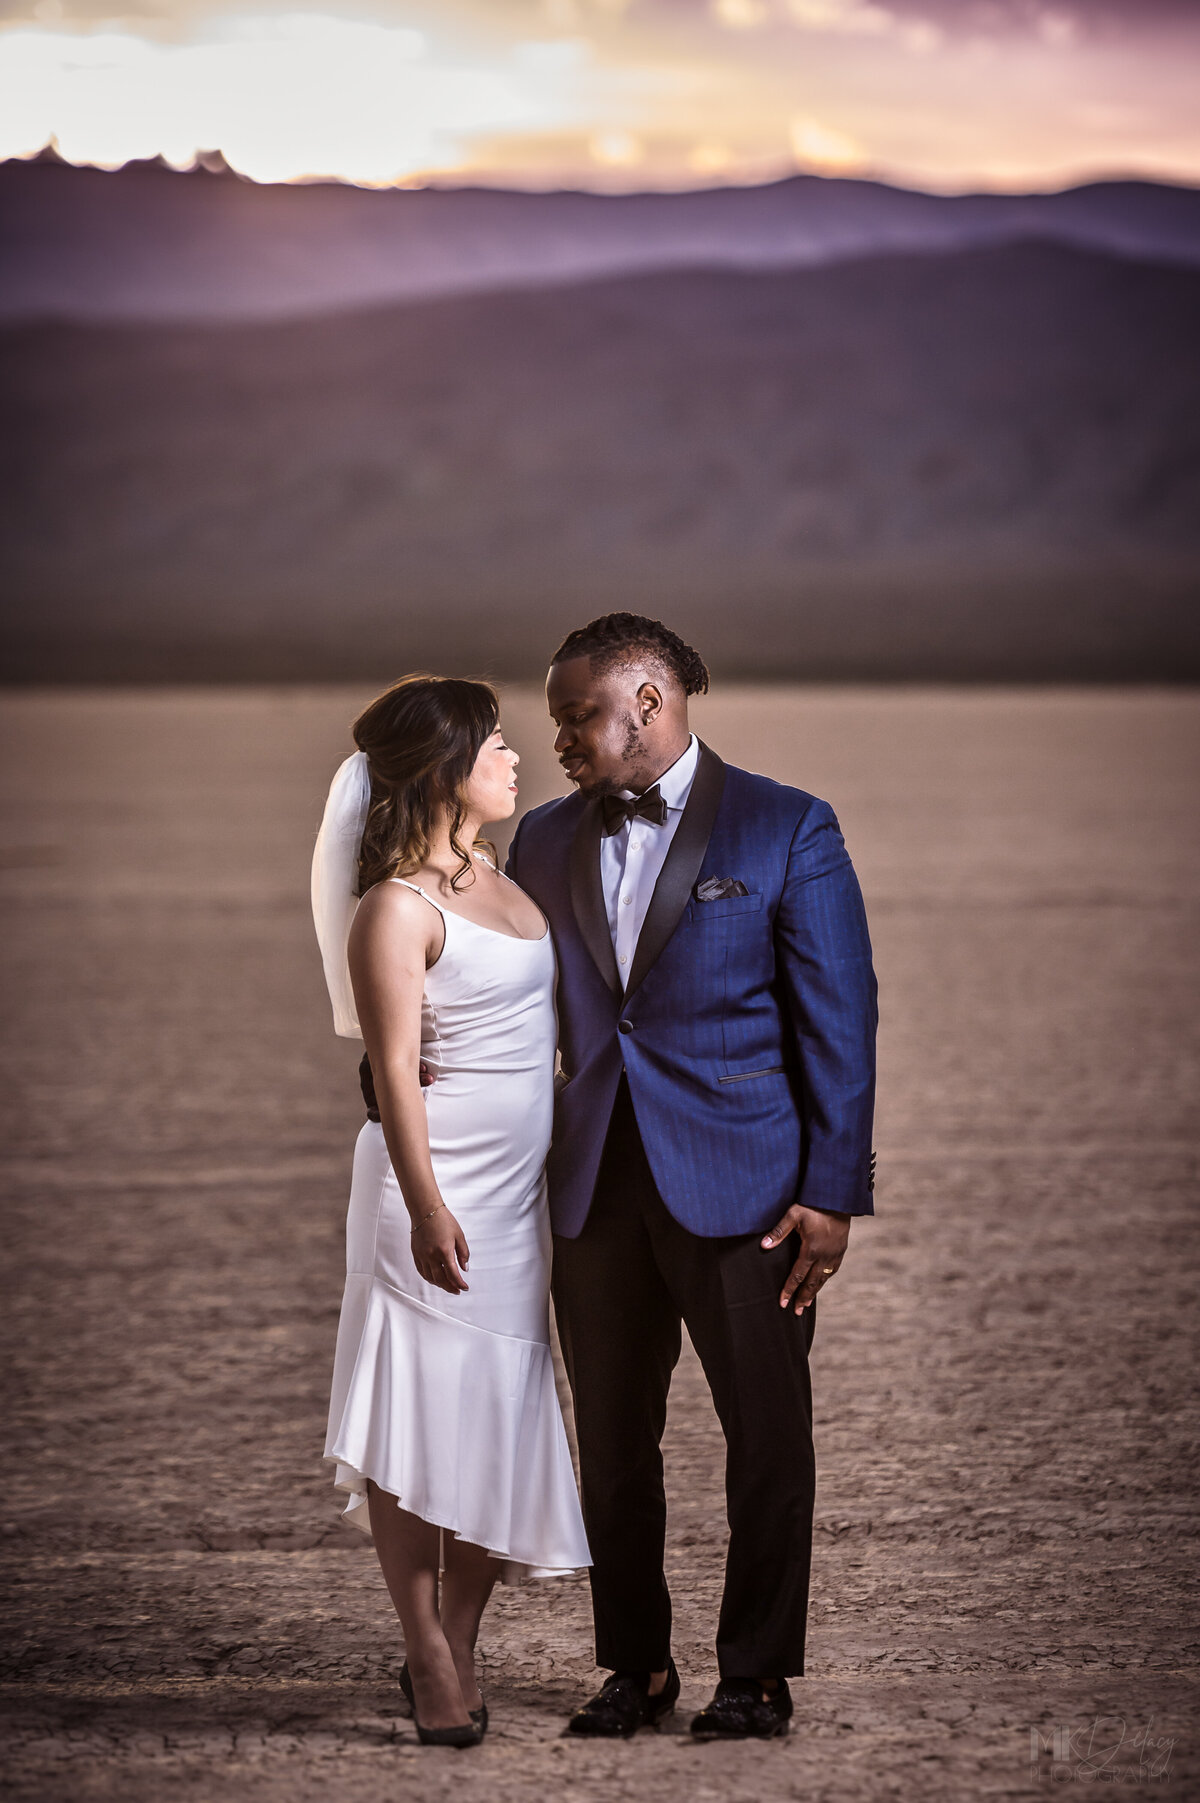 Martha Stewart weddings  couple GQ style couple bride and groom stare passionately at each other  las vegas elopement on the dry lake bed  at golden hour groom in blue suit jacket and black  pants  las vegas elopement eloping in vegas  las vegas wedding photographers las vegas wedding photography mk delacy photography